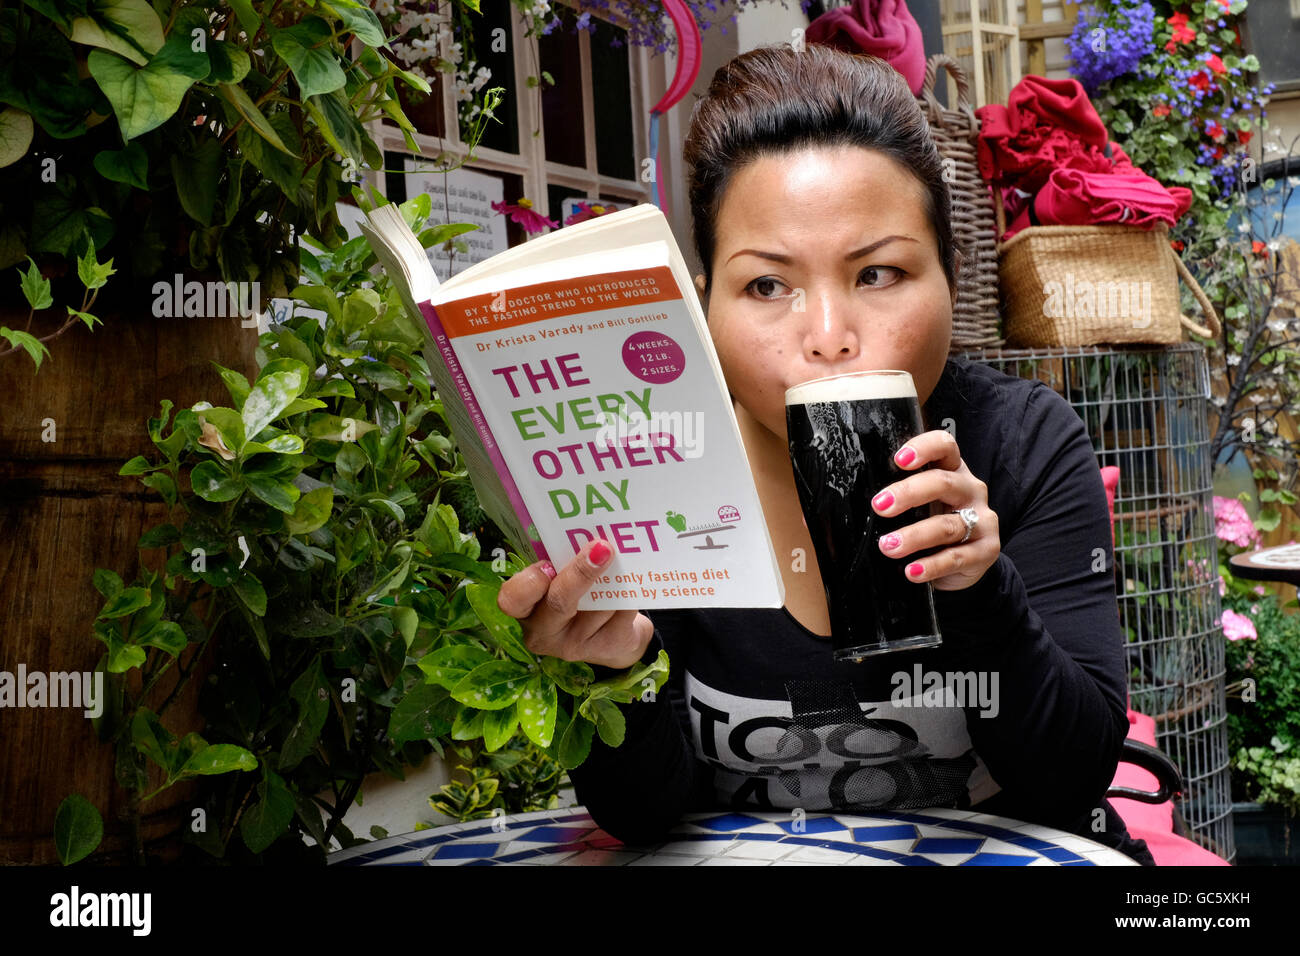 young-female-reading-dieting-book-while-drinking-beer-in-a-pub-garden-GC5XKH.jpg